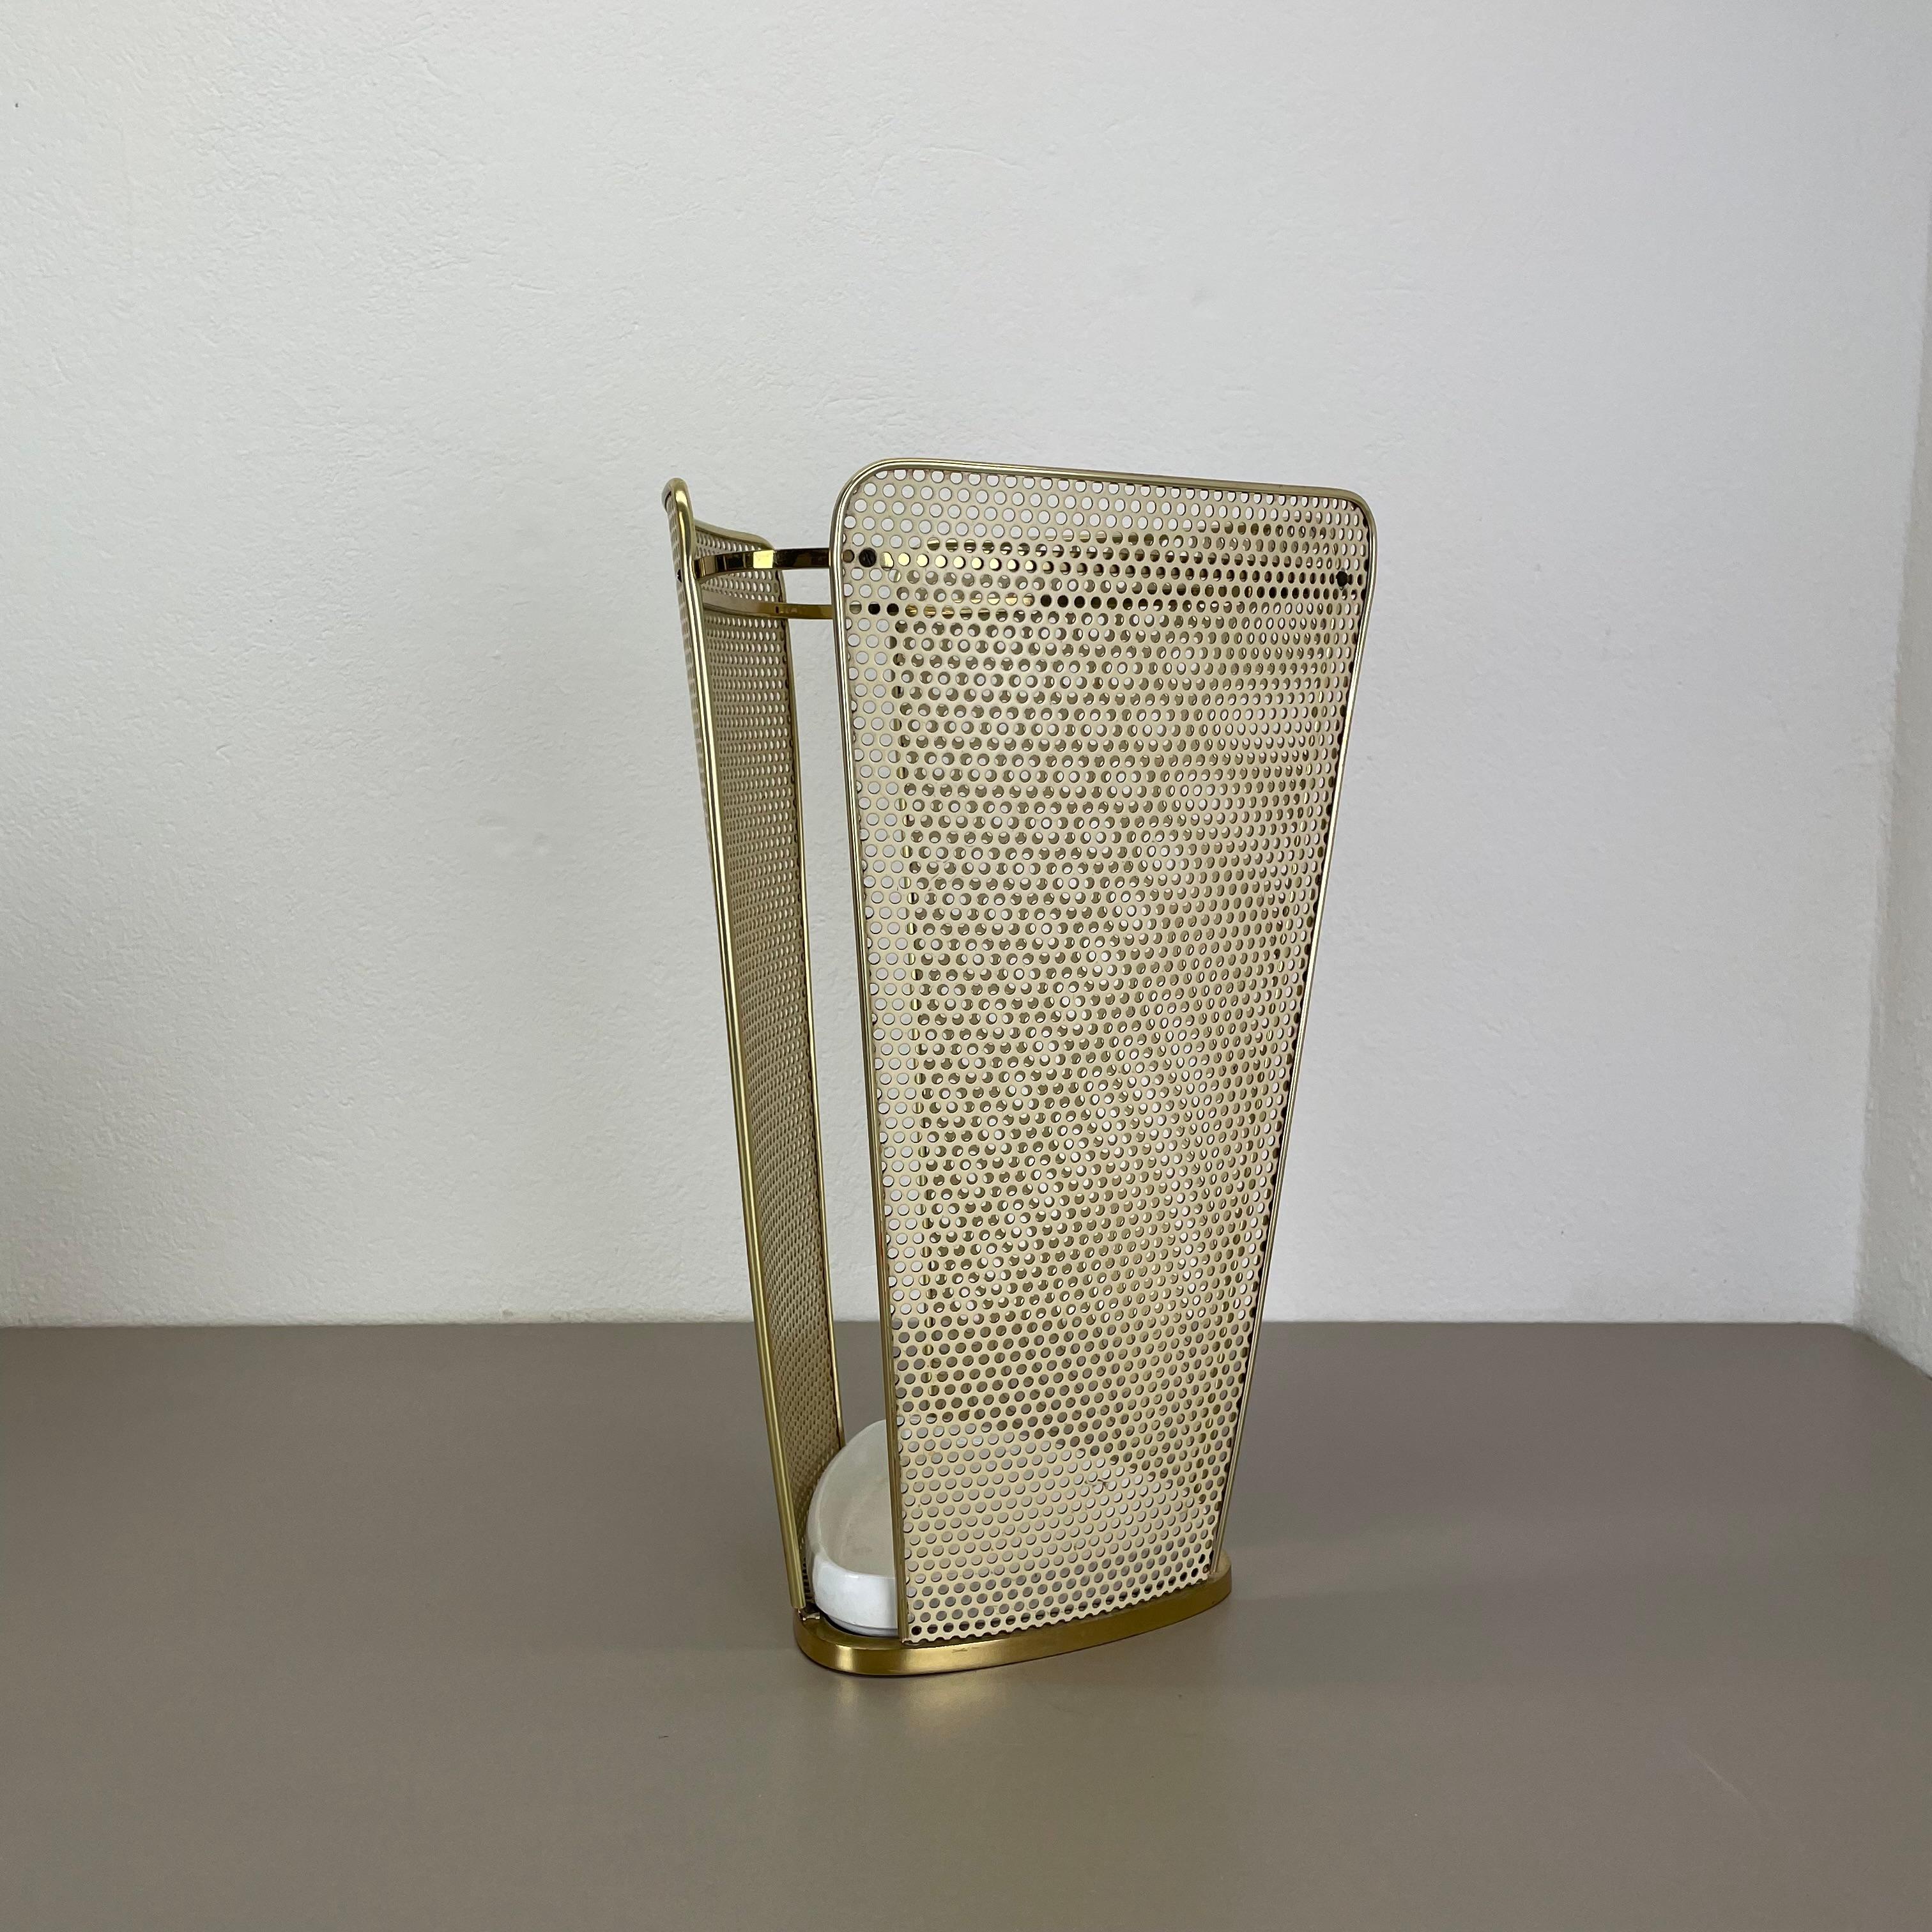 Article:

Umbrella stand in style of Matégot



Origin:

France


Age:

1950s



This original vintage umbrella stand element was produced in the 1950s in France. It is made of solid metal in a white lacquered tone with perforated hole pattern